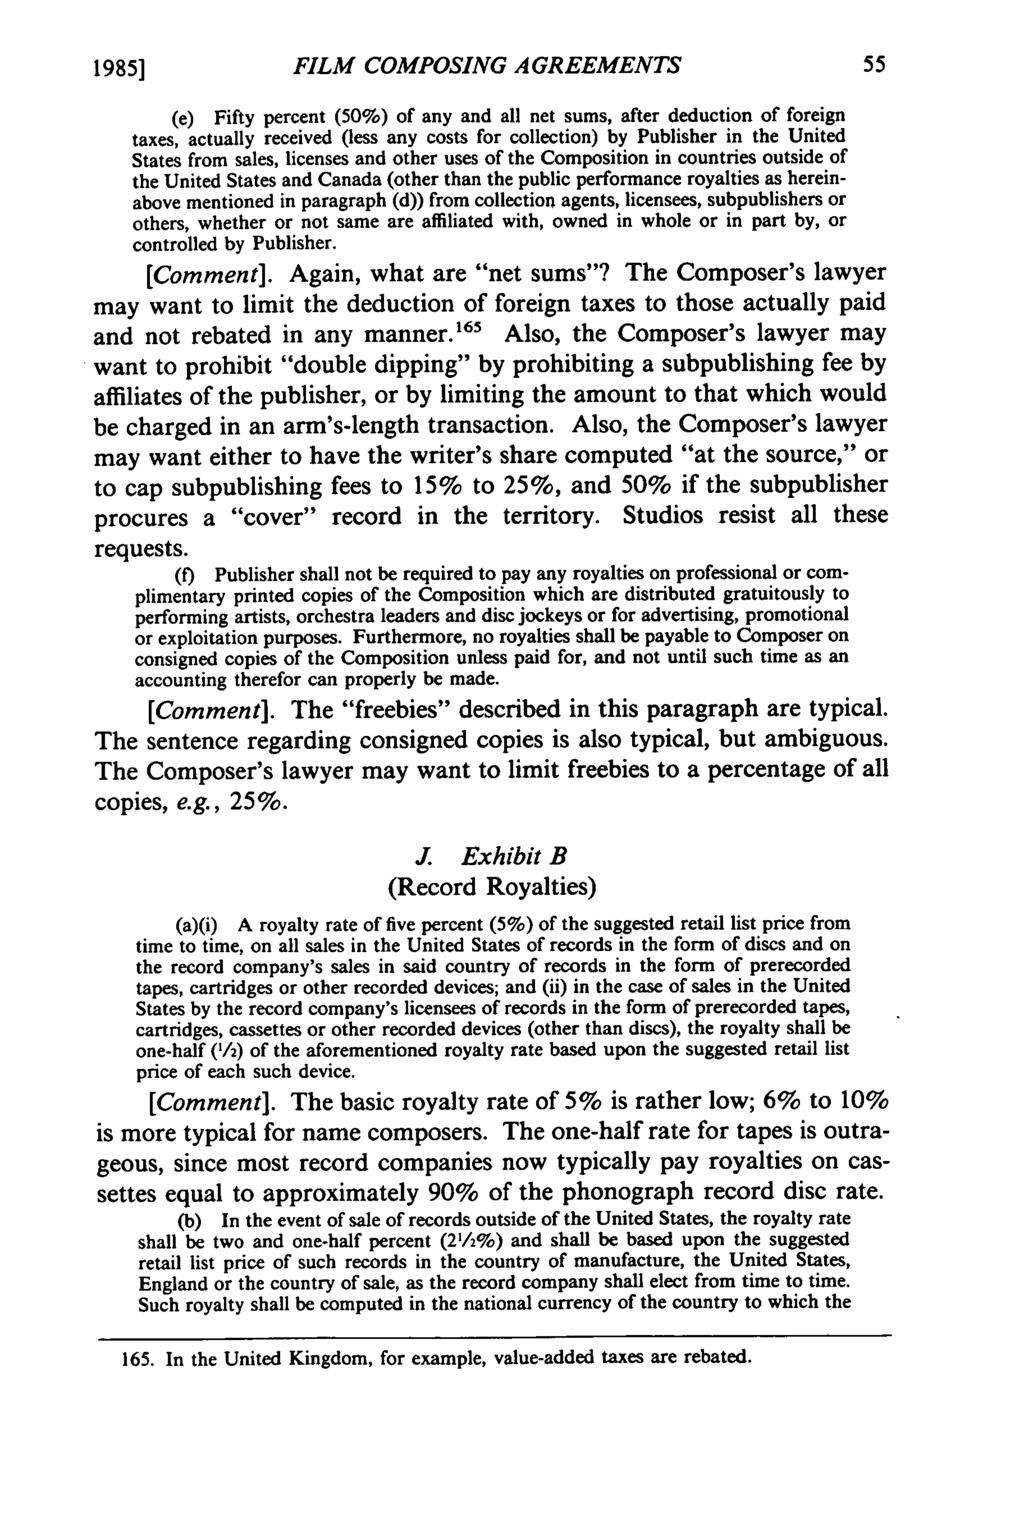 1985] FILM COMPOSING AGREEMENTS (e) Fifty percent (50%) of any and all net sums, after deduction of foreign taxes, actually received (less any costs for collection) by Publisher in the United States